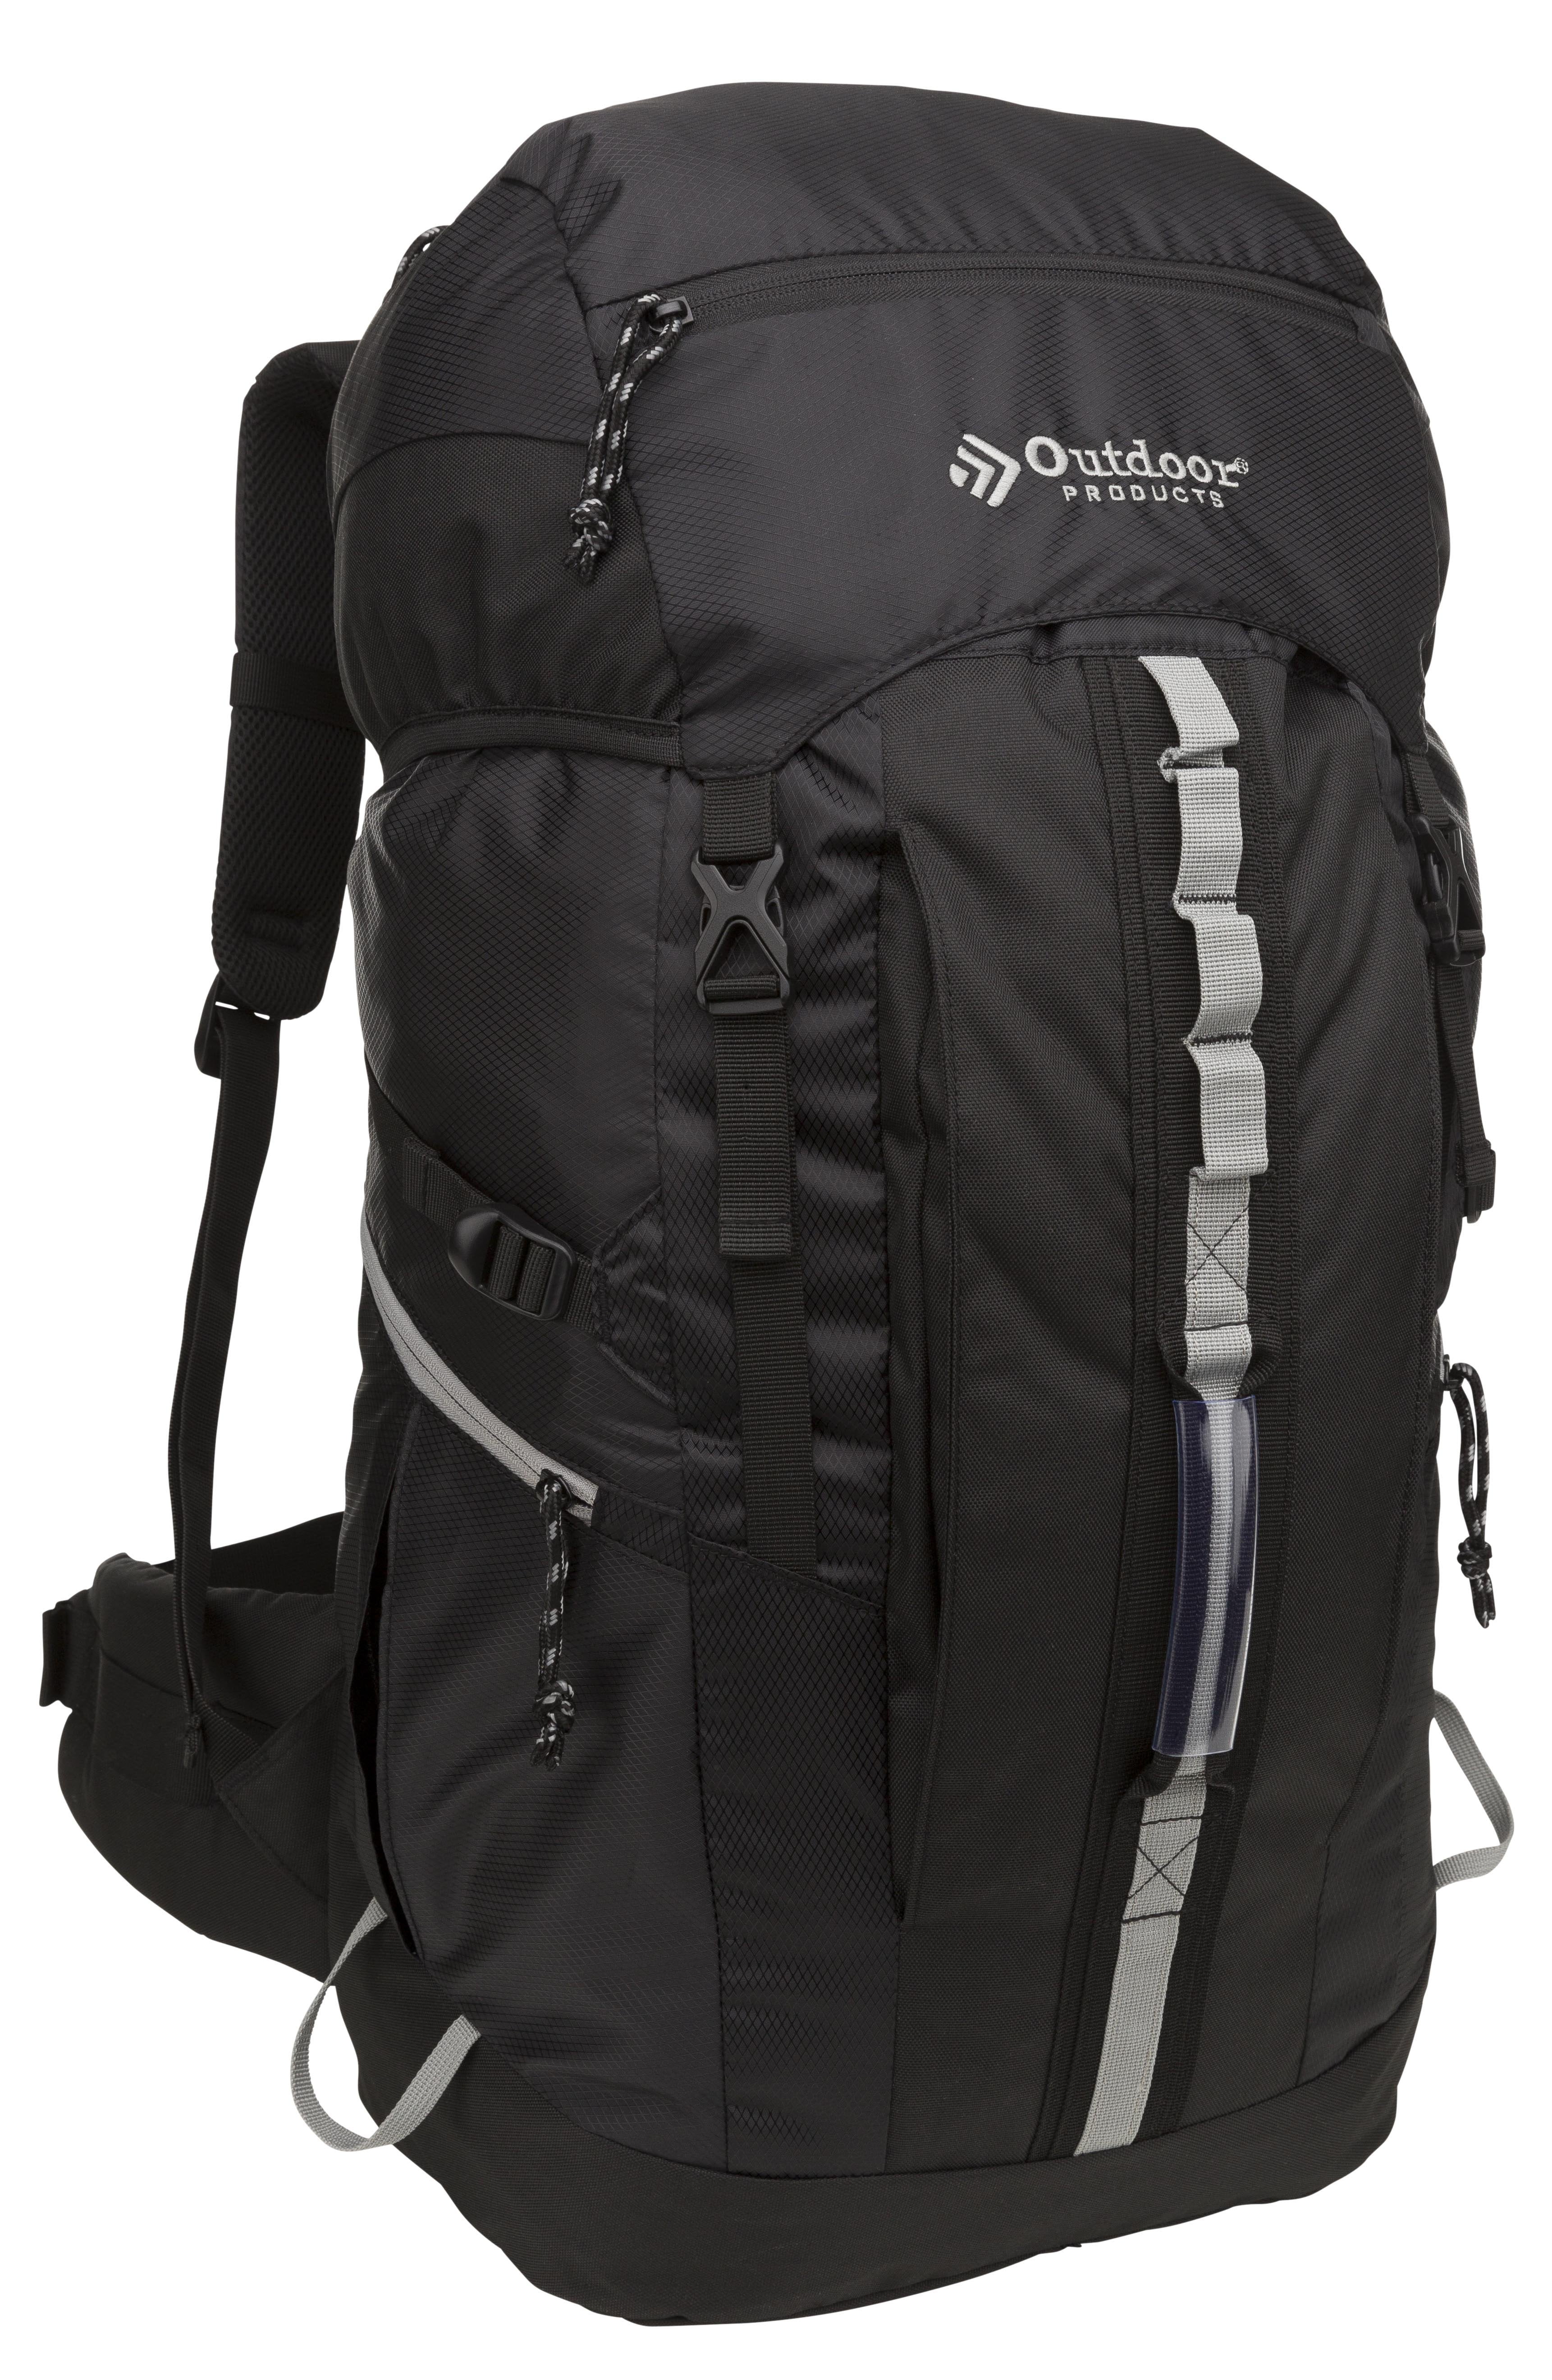 Details about   Gray Outdoor Products Arrowhead Backpack